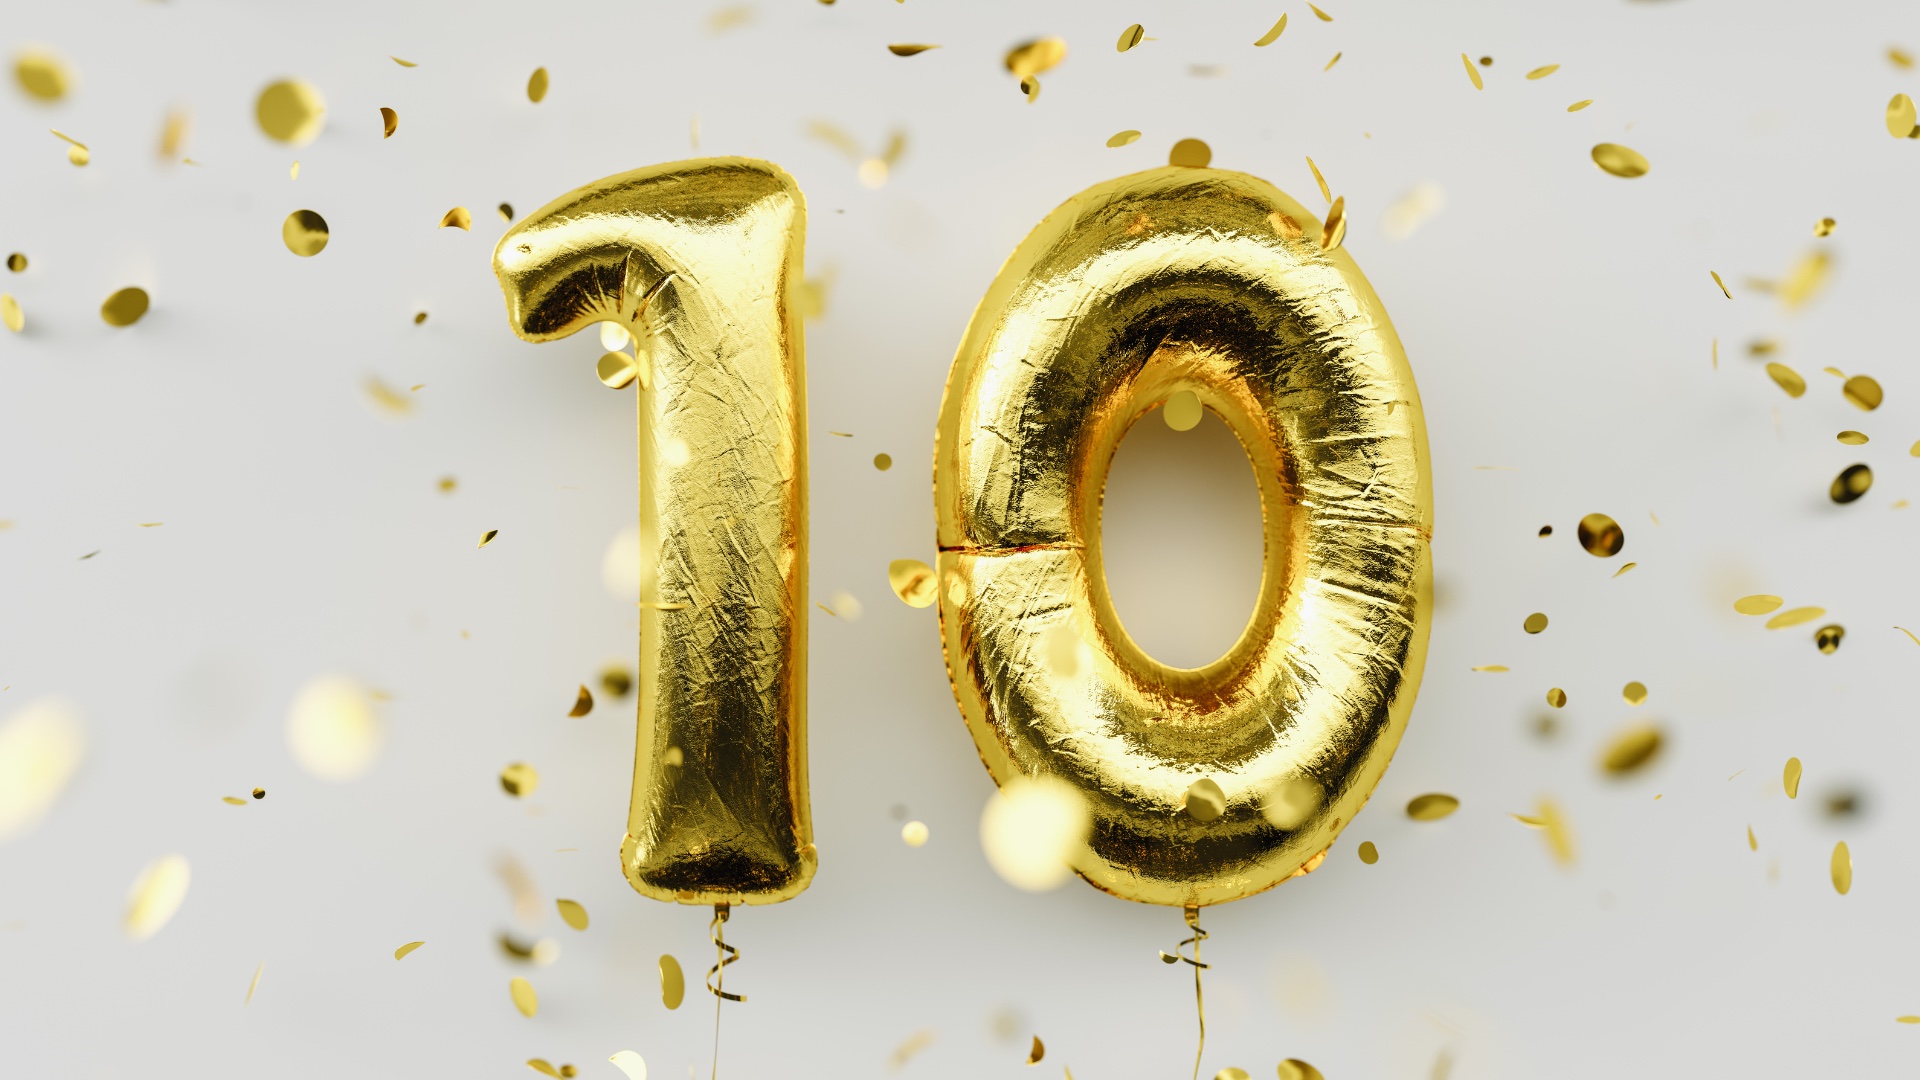 10 years helping regulated industries do the right thing, more effectively